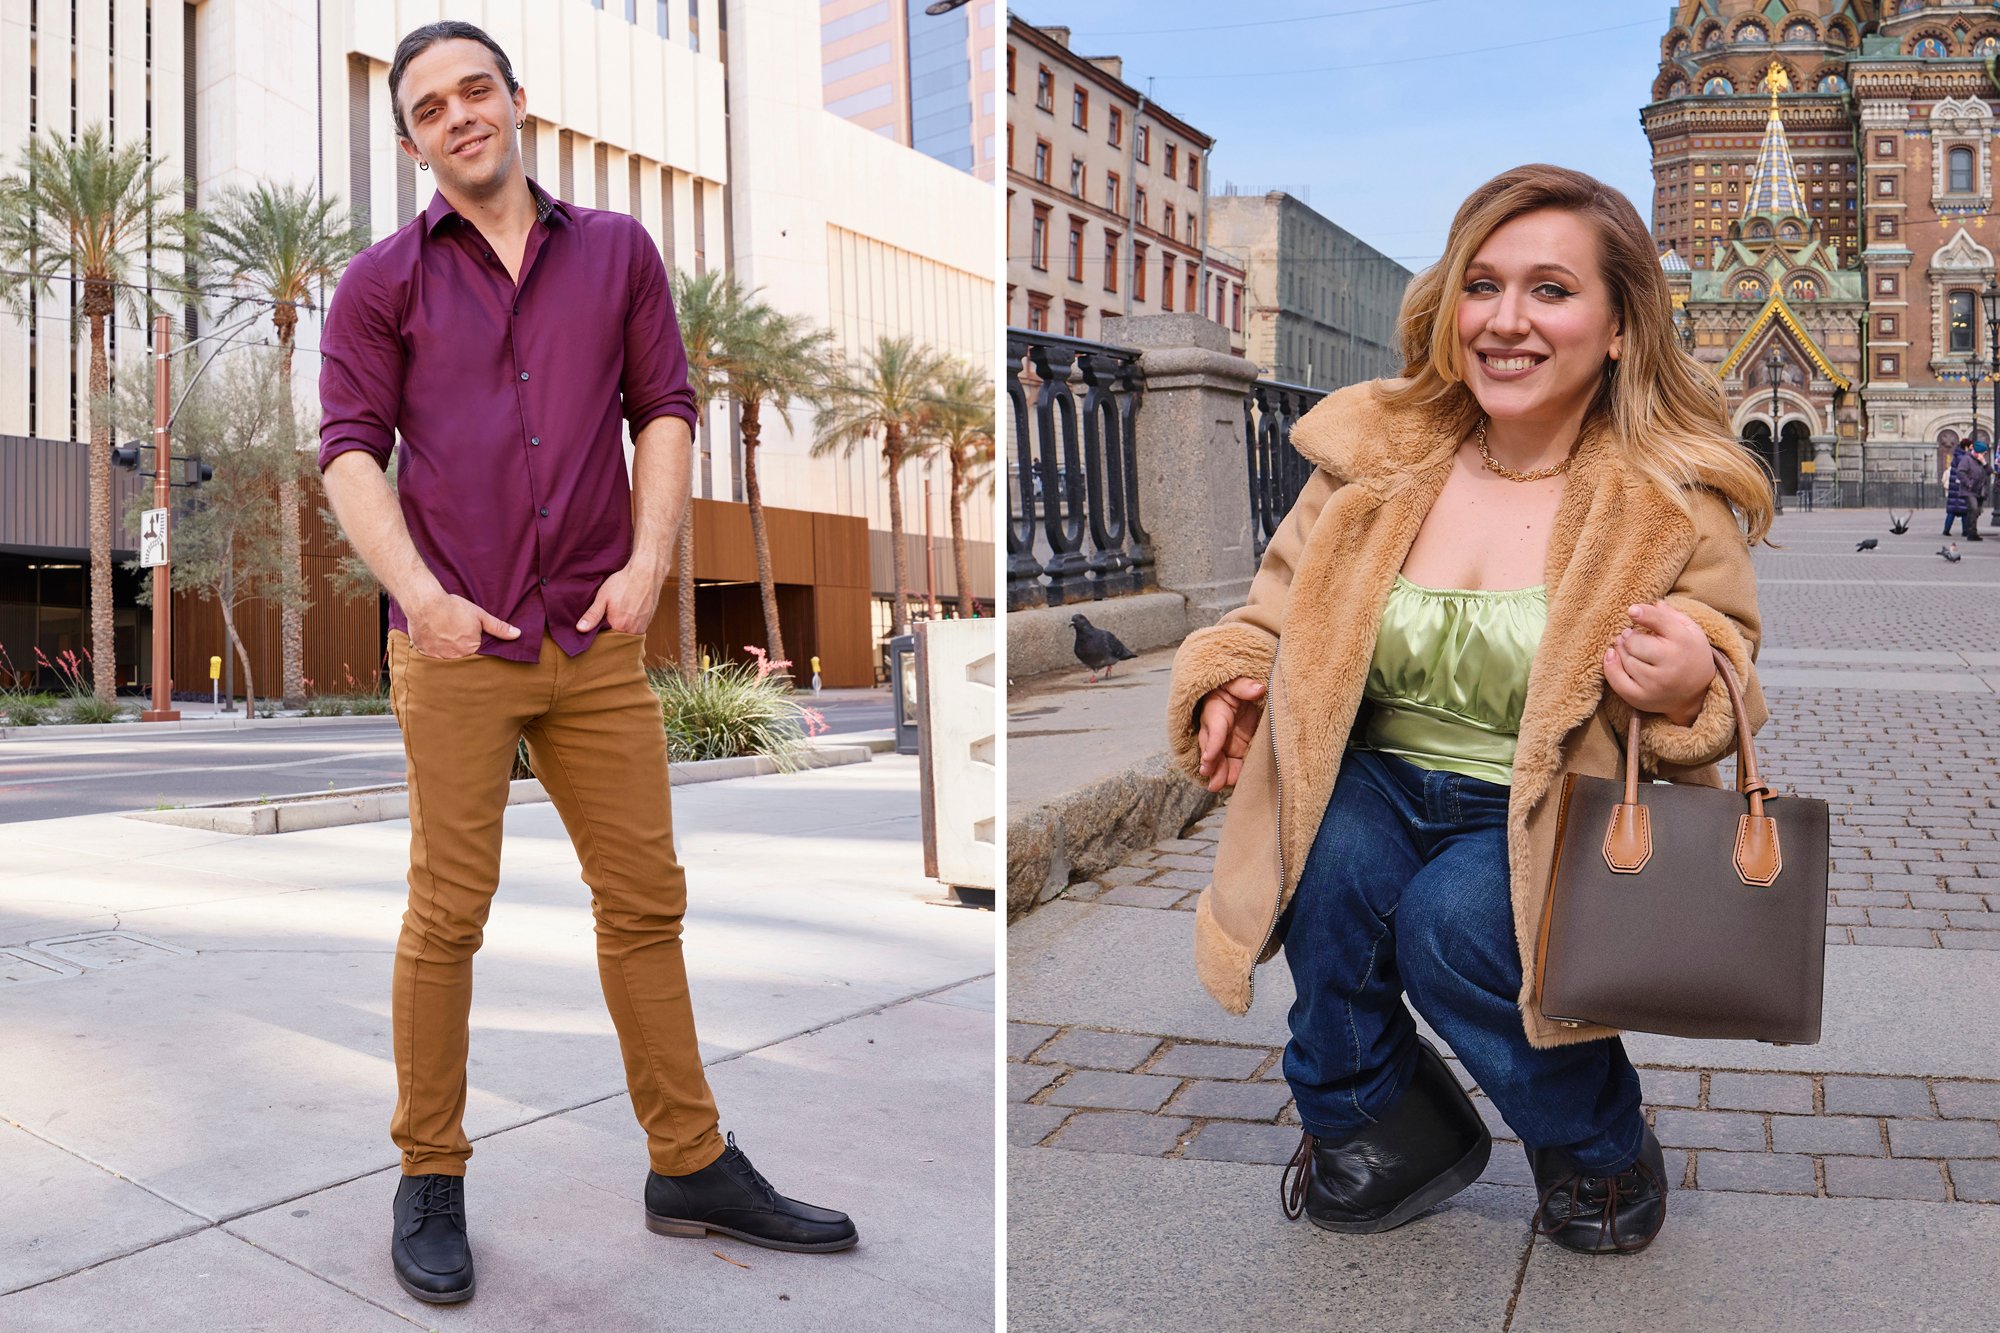 '90 Day Fiancé: Before the 90 Days' Season 5 couple Caleb and Alina seen here in promotional images. Caleb wears a burgundy button down and khakis while Alina wears a green satin shirt and jeans underneath a brown fur coat.